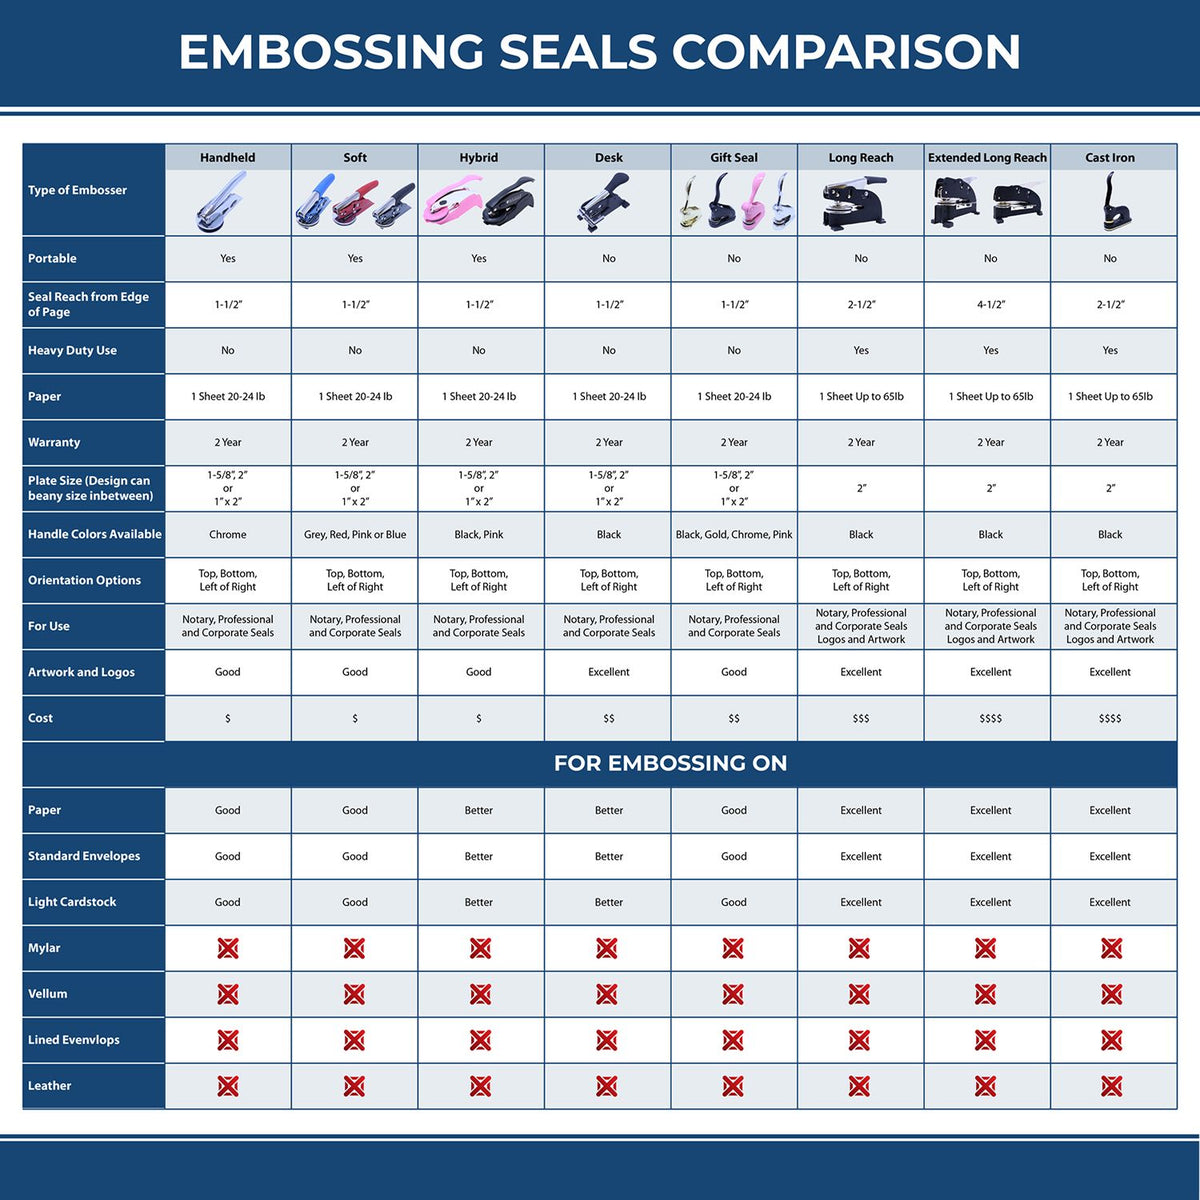 A comparison chart for the different types of mount models available for the Heavy Duty Cast Iron Washington Architect Embosser.